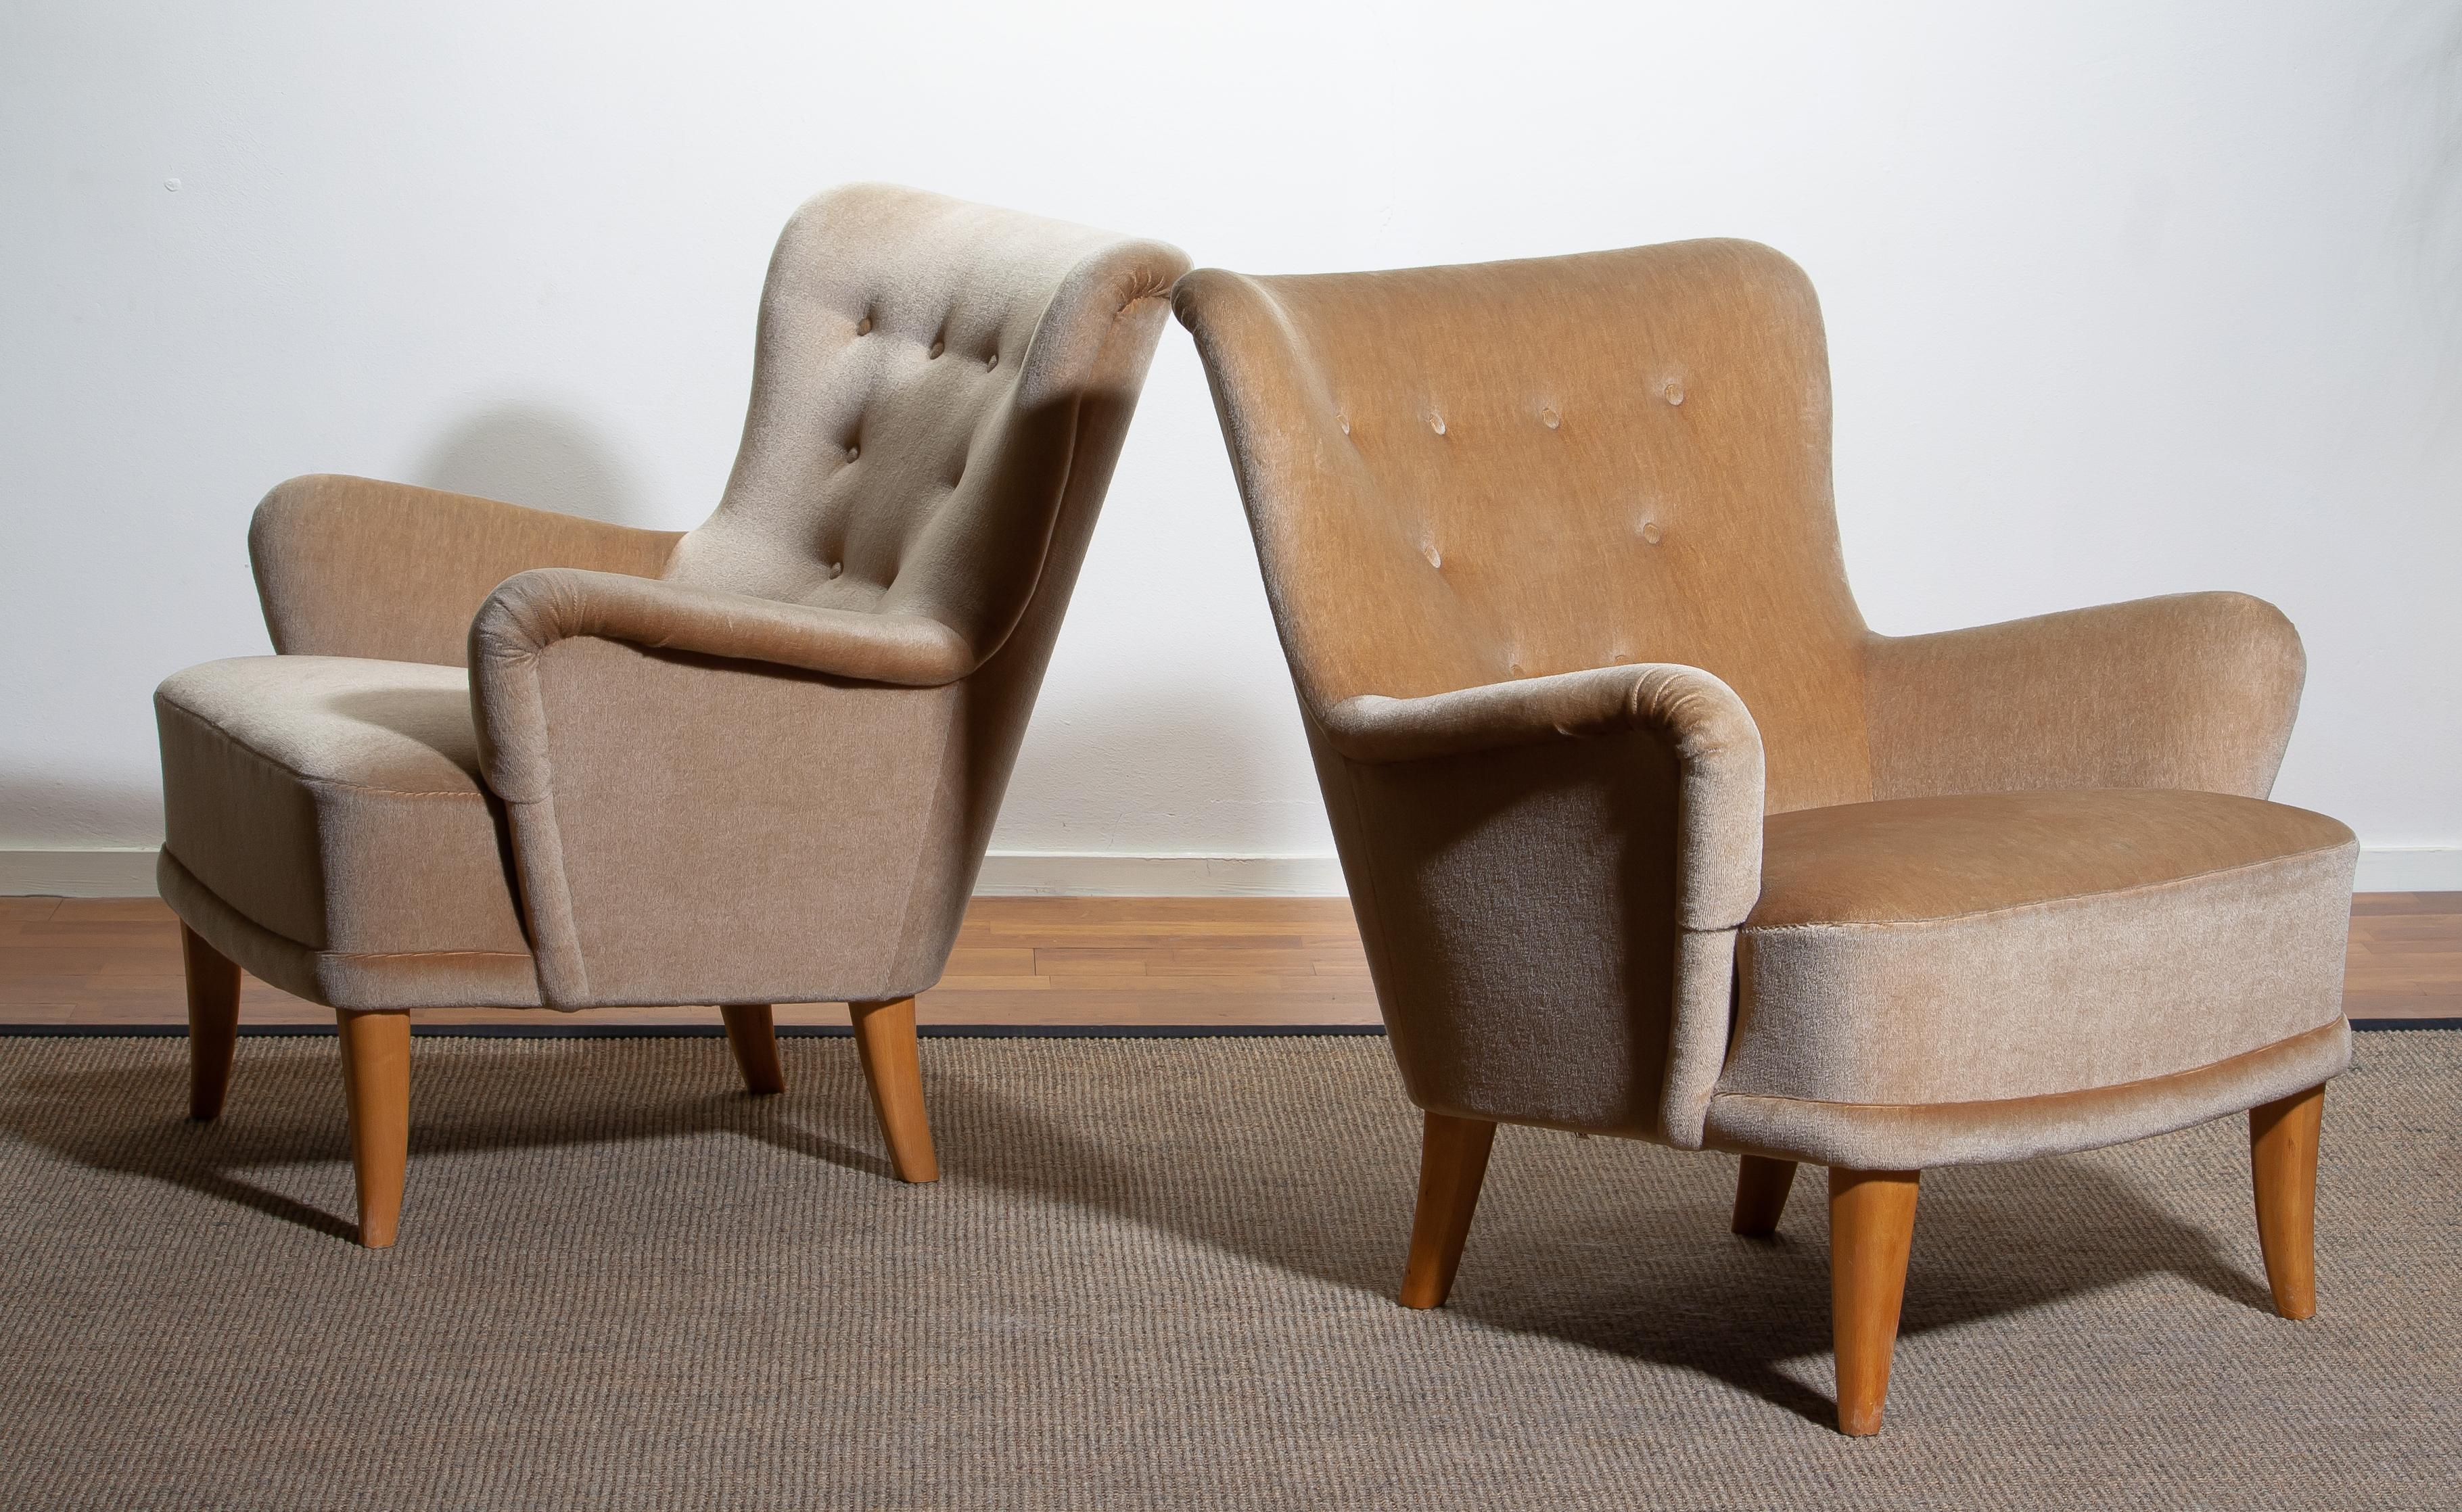 Set of two beautiful 1940s / 1950s lounge / club chairs covered with beige vetvet upholstery and beech legs designed by Carl Malmsten for O.H. Sjögren. Sweden.
The overall condition of the chairs is that they are in good and comfortable condition.